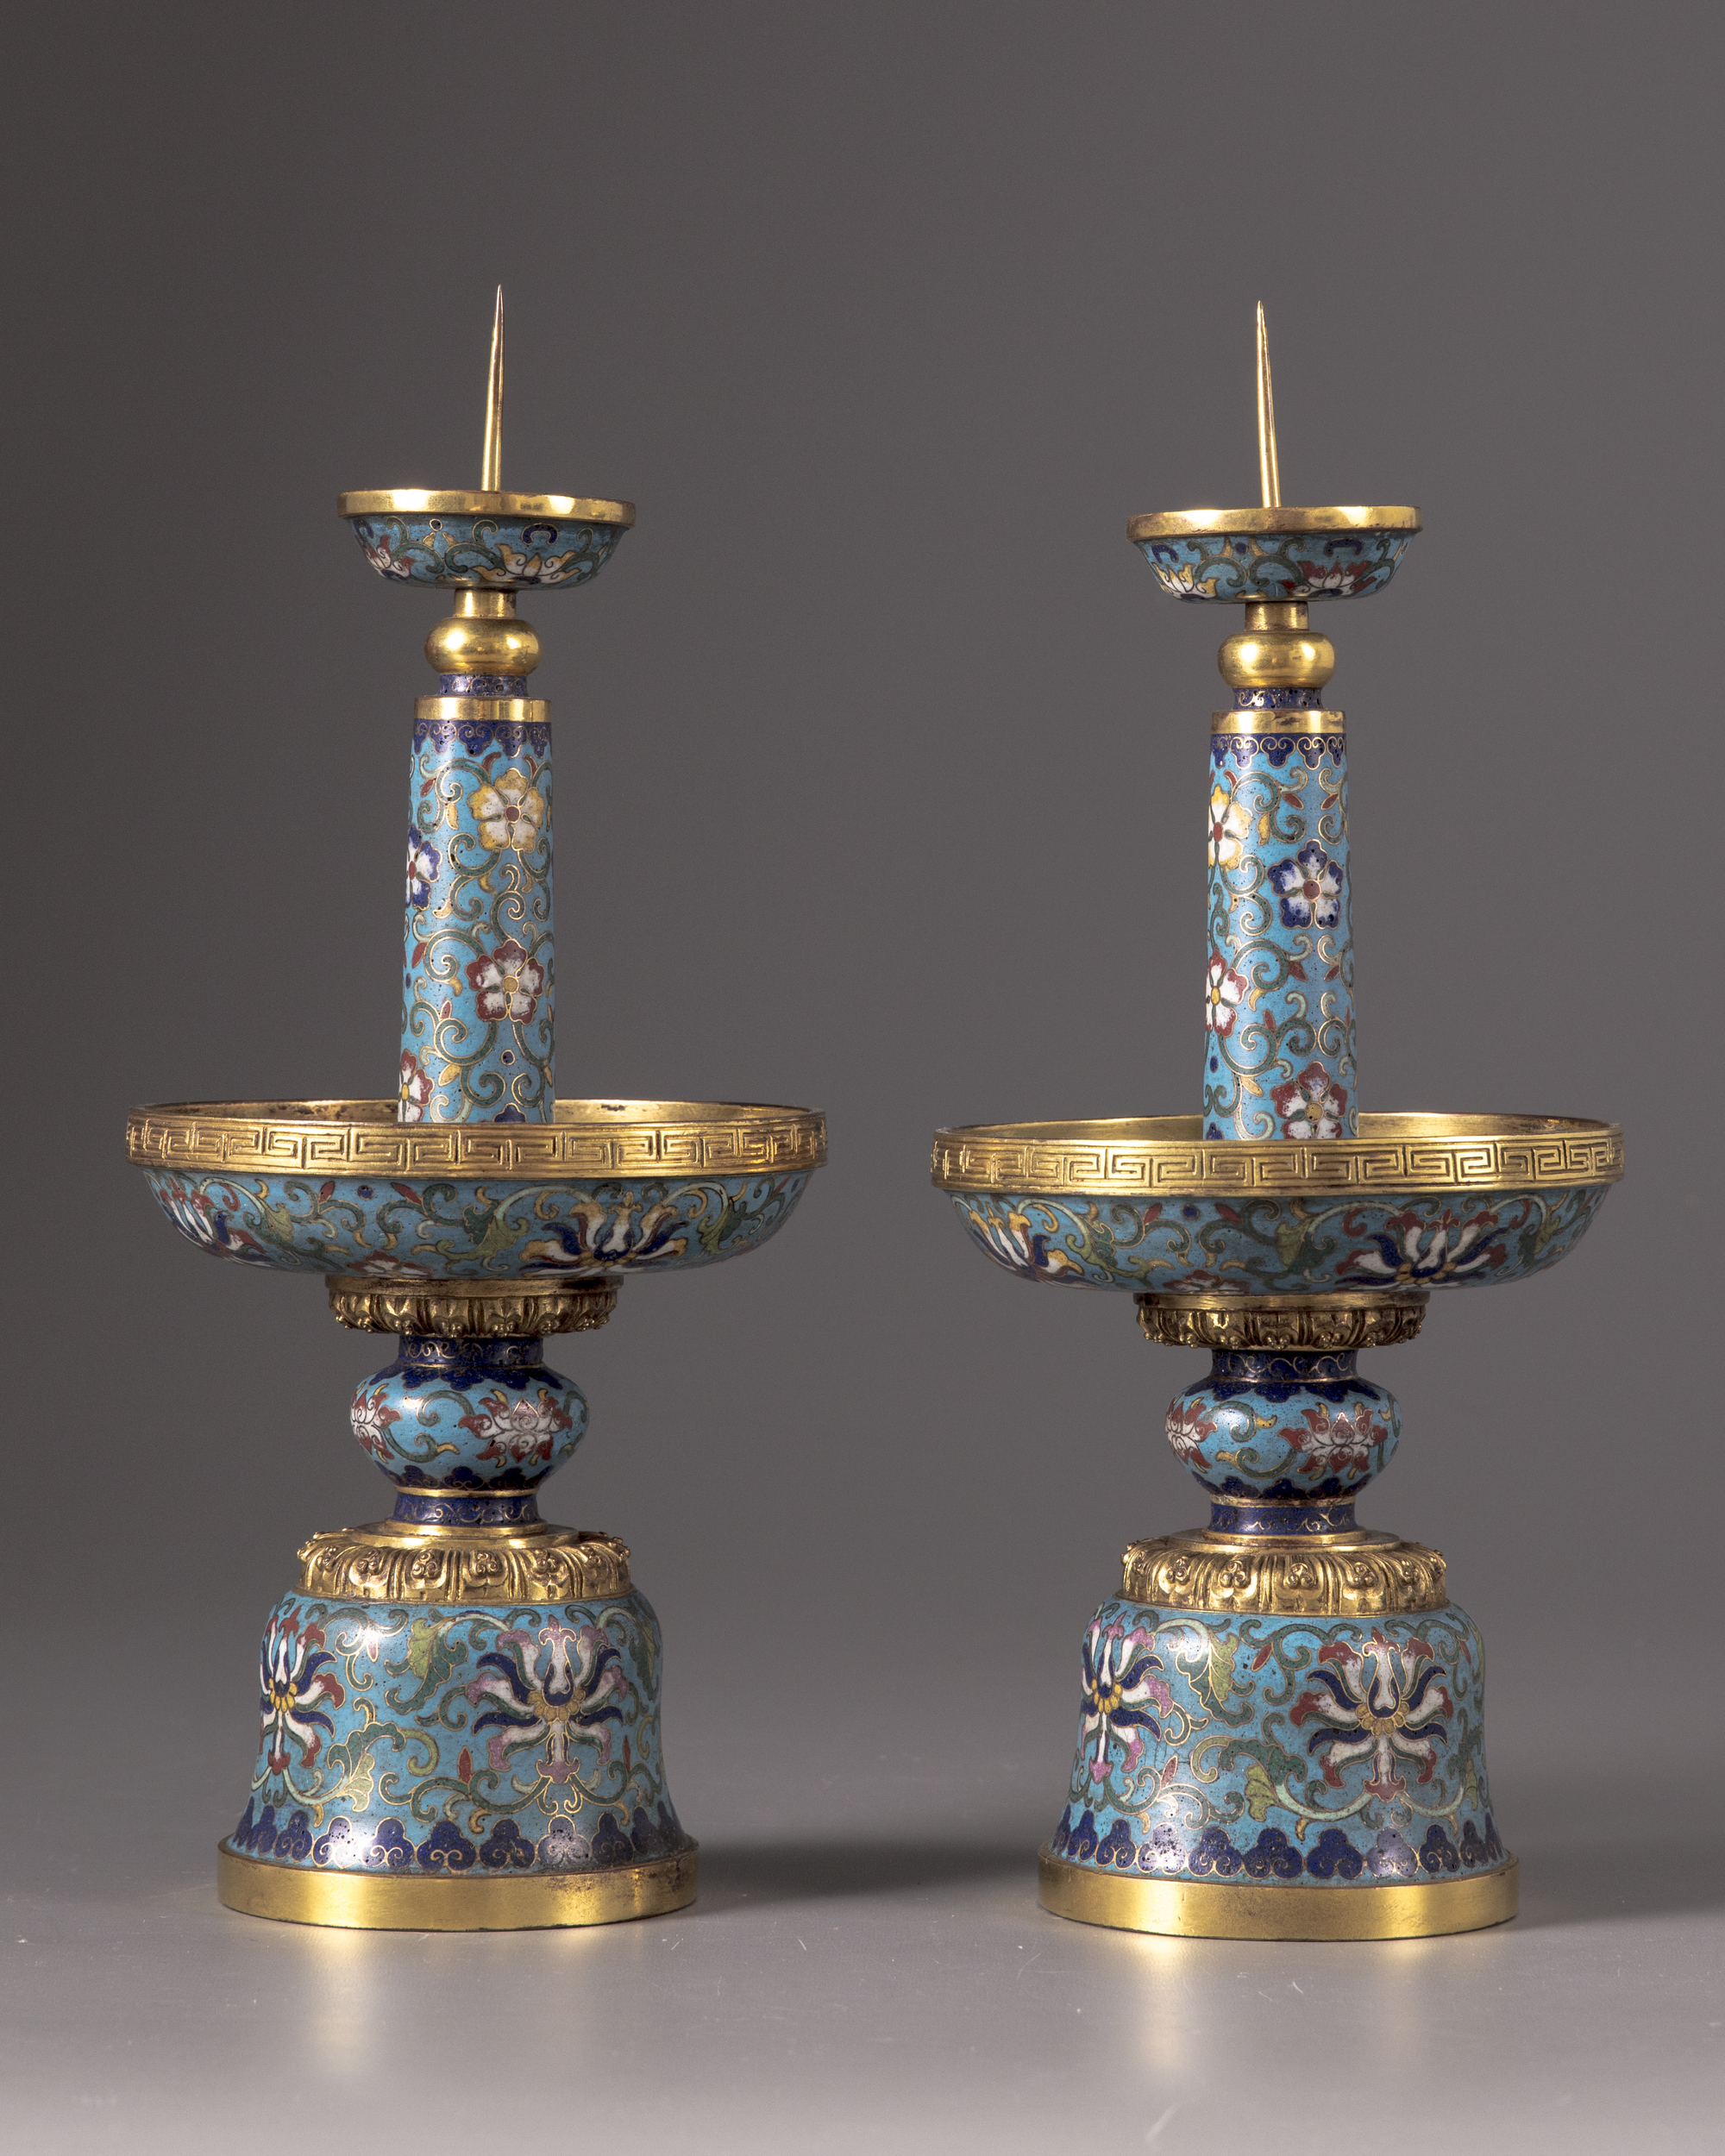 A pair of Chinese cloisonné candle-stands